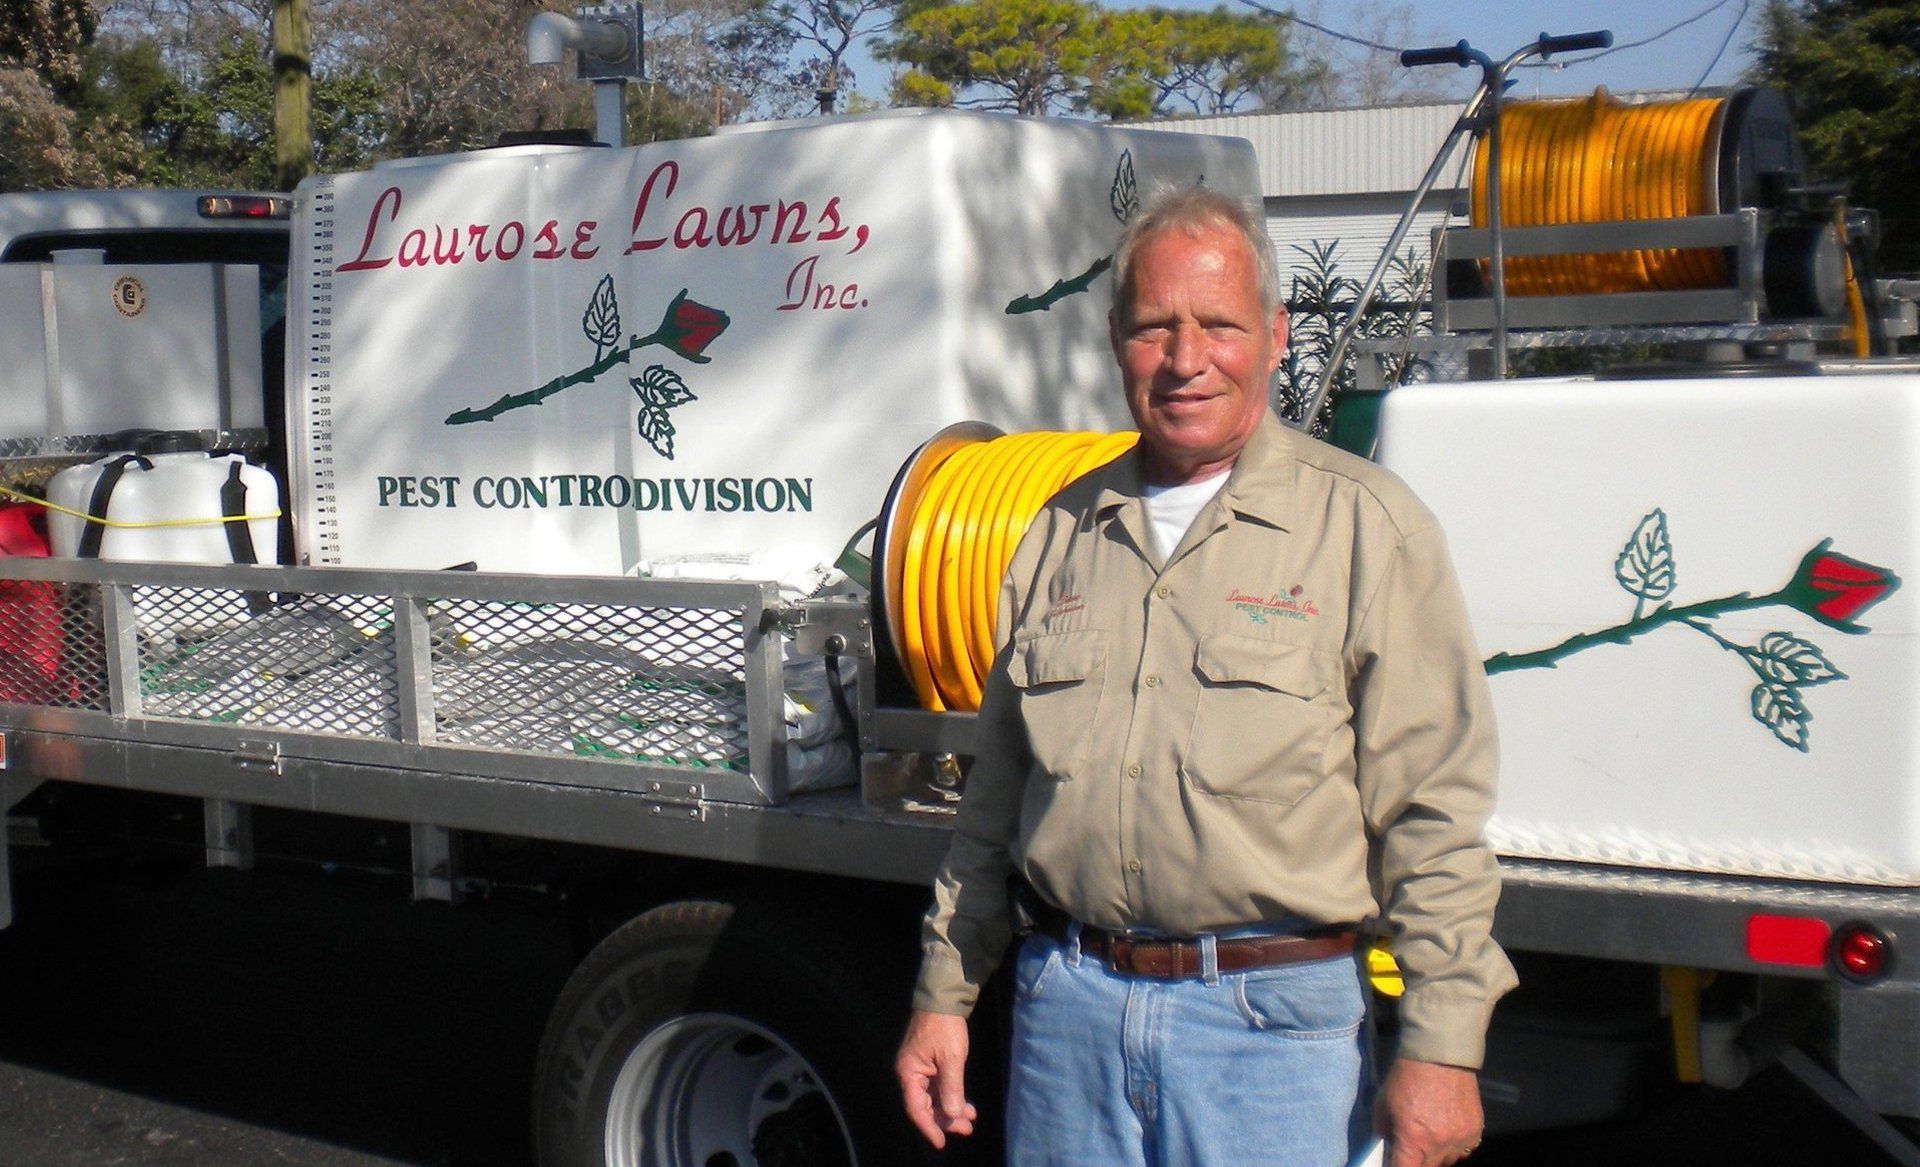 Laurose Lawns Inc. Truck and our Pest Control Manager